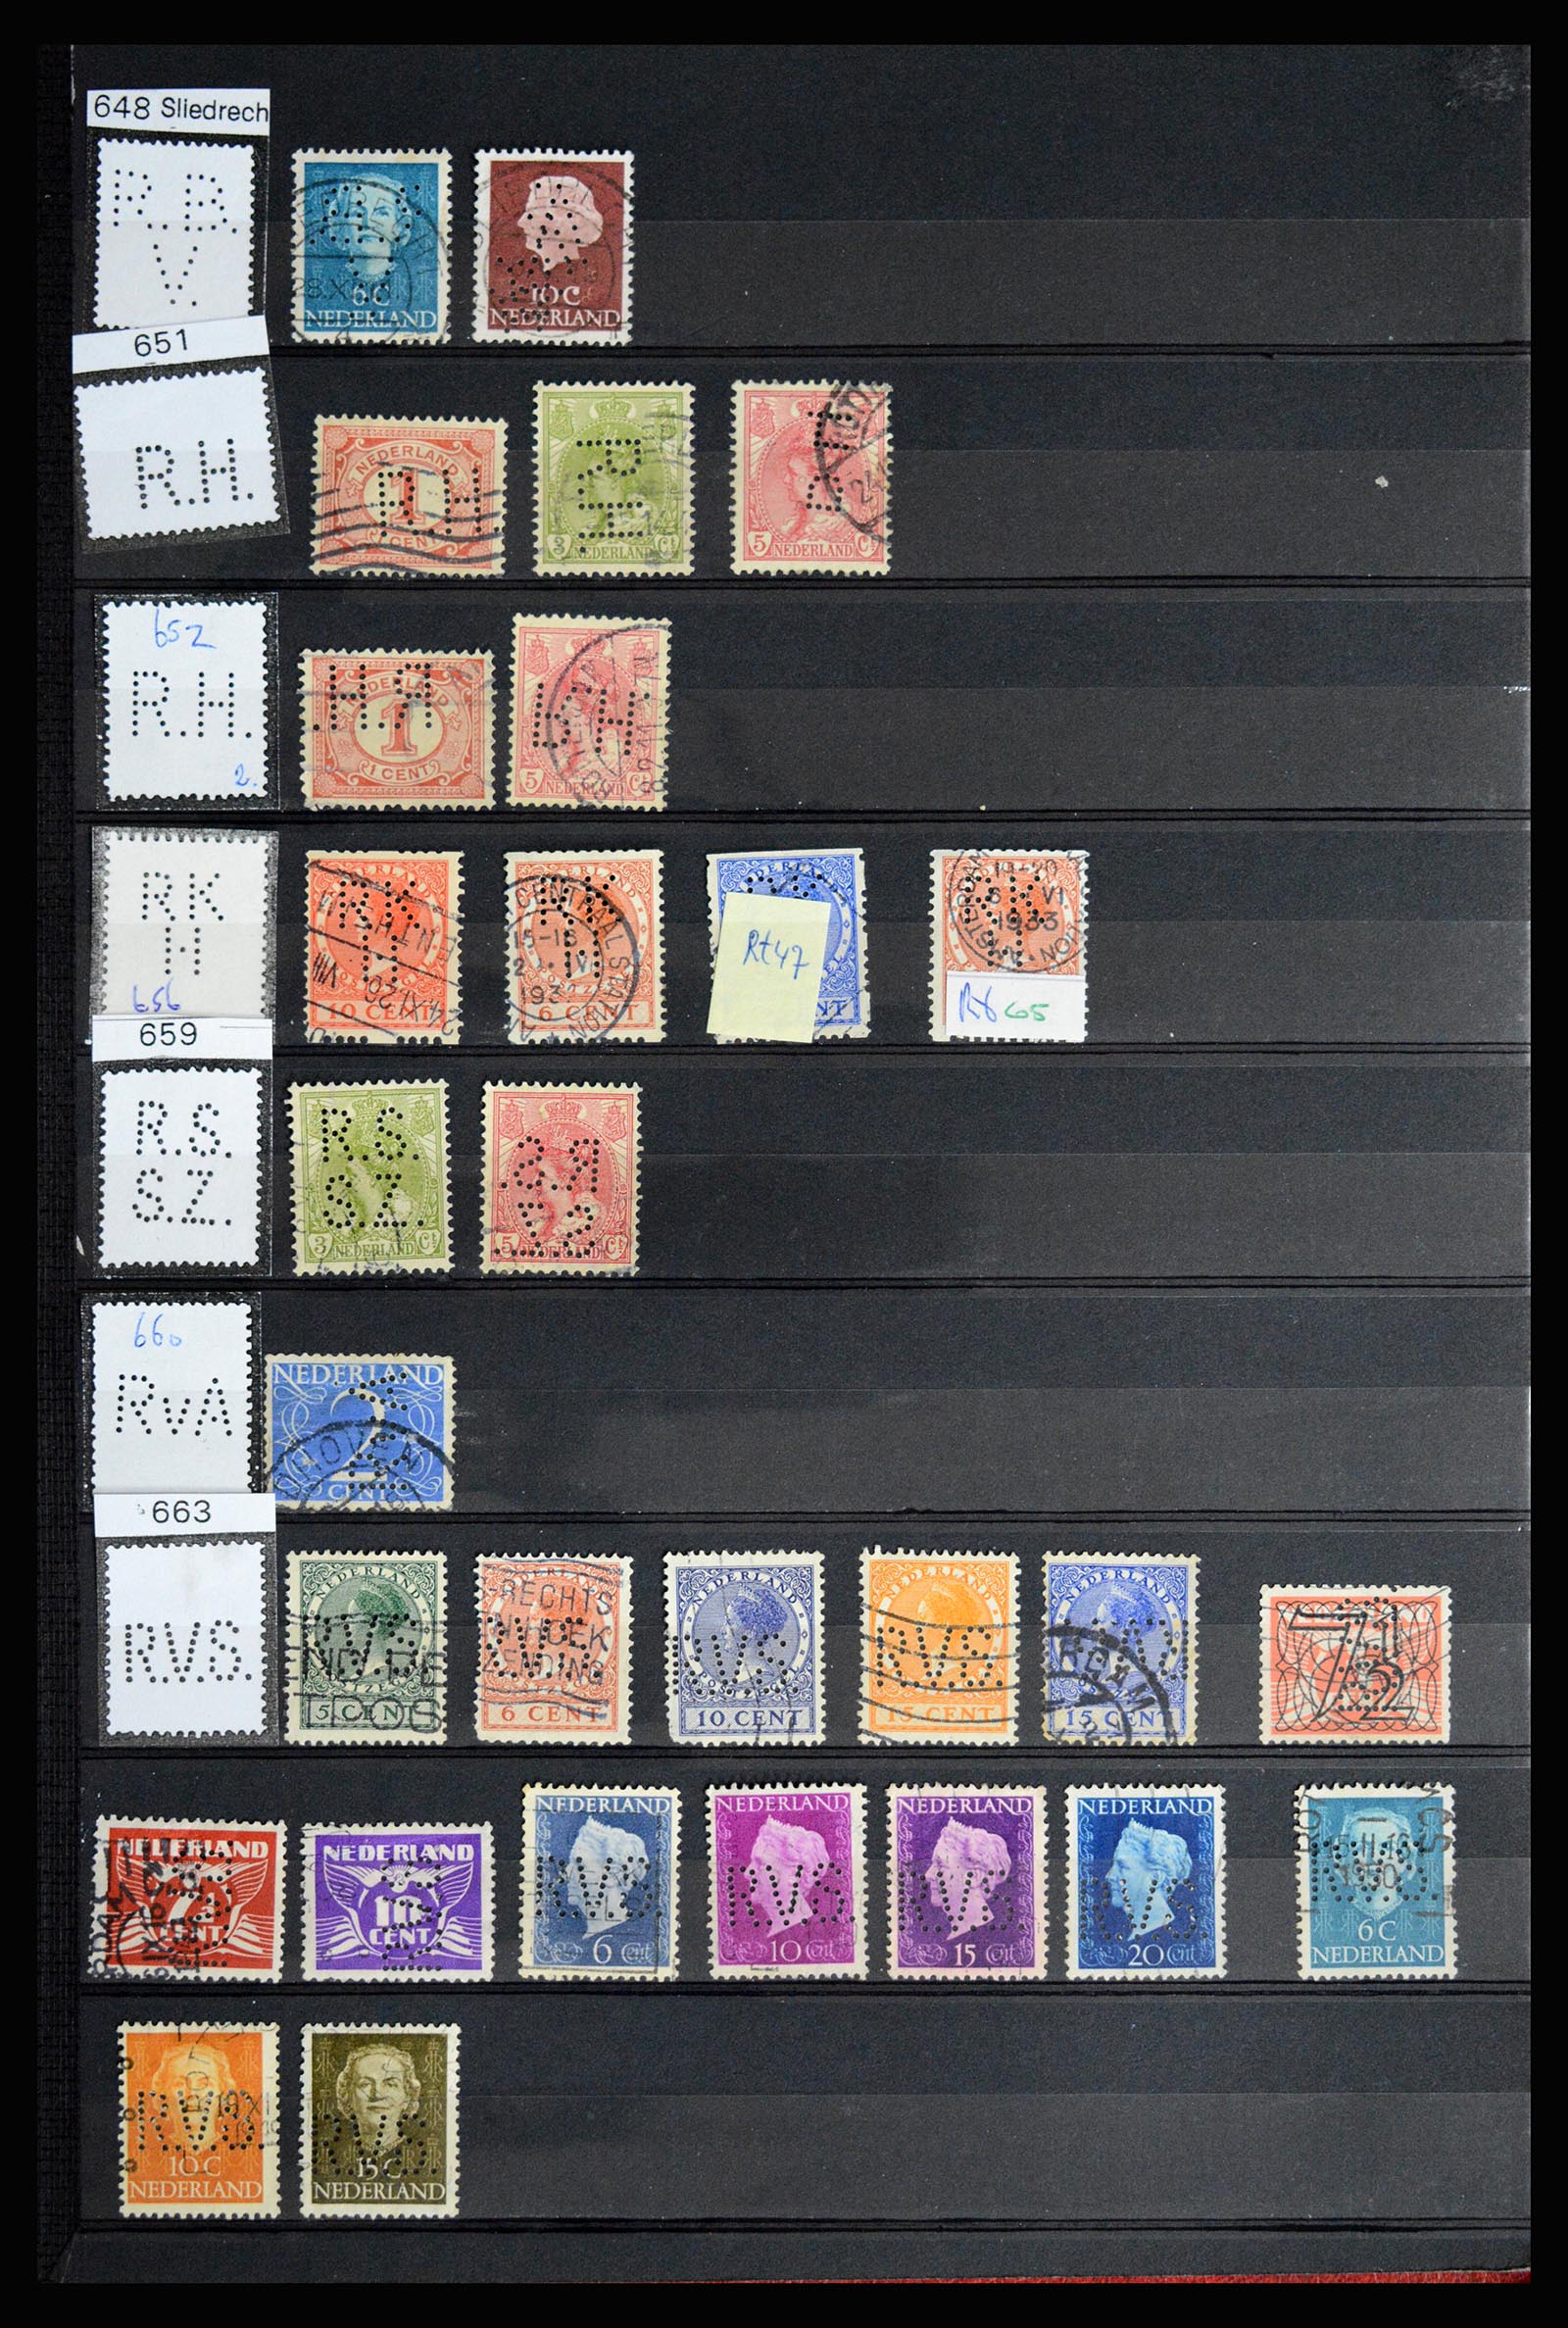 36849 067 - Stamp collection 36849 Netherlands perfins 1891-1960.